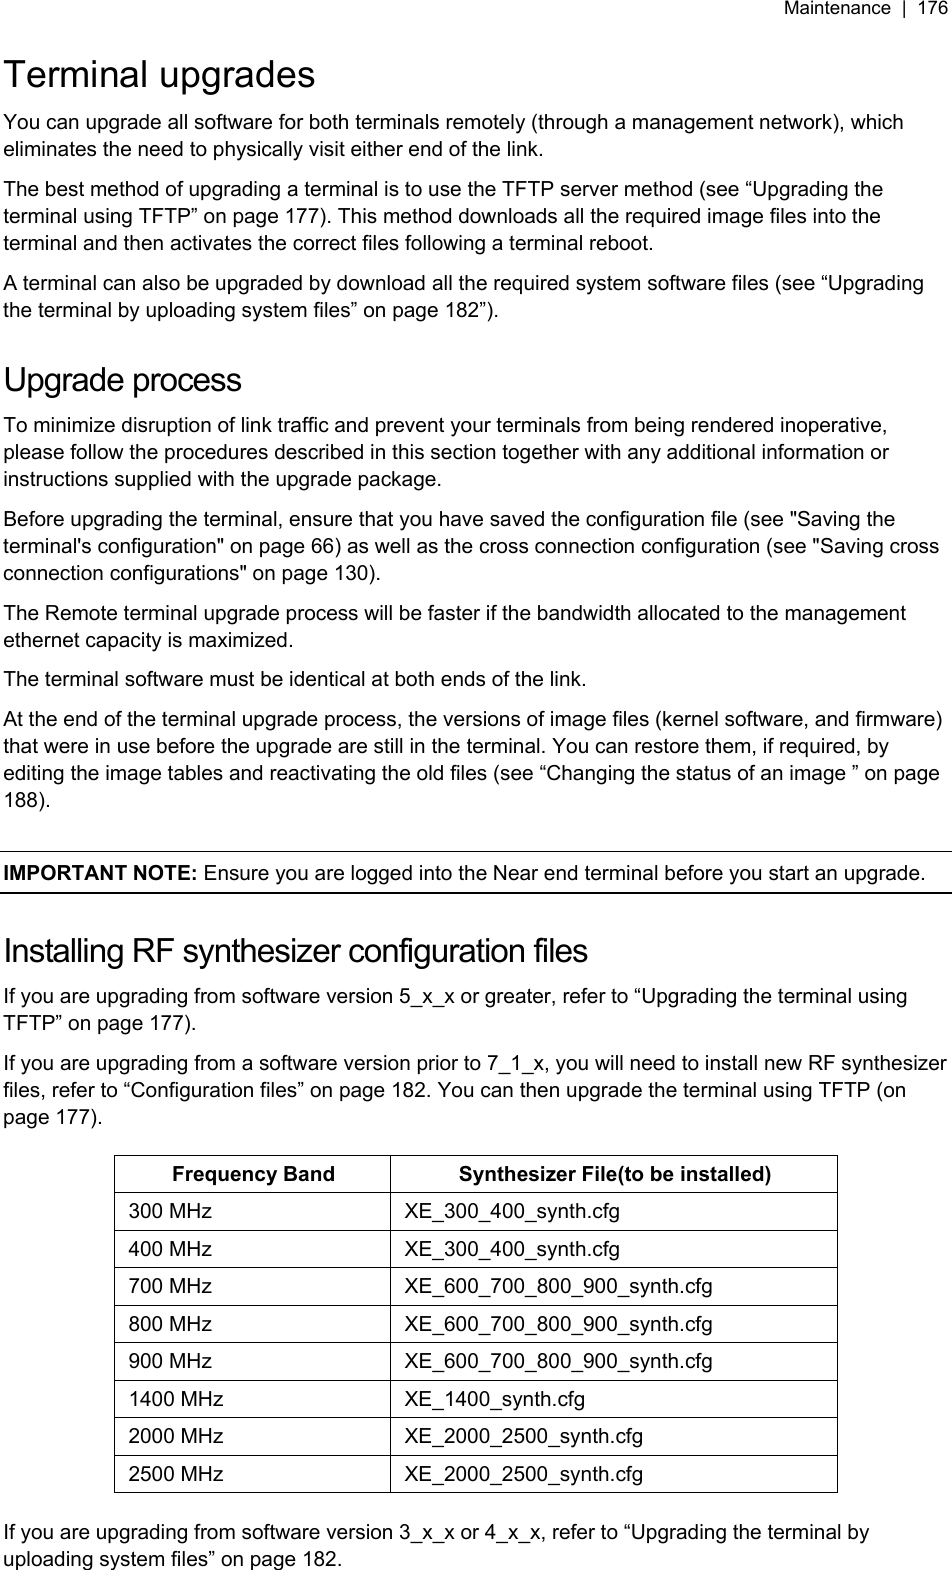 Maintenance  |  176   Terminal upgrades You can upgrade all software for both terminals remotely (through a management network), which eliminates the need to physically visit either end of the link. The best method of upgrading a terminal is to use the TFTP server method (see “Upgrading the terminal using TFTP” on page 177). This method downloads all the required image files into the terminal and then activates the correct files following a terminal reboot. A terminal can also be upgraded by download all the required system software files (see “Upgrading the terminal by uploading system files” on page 182”).  Upgrade process To minimize disruption of link traffic and prevent your terminals from being rendered inoperative, please follow the procedures described in this section together with any additional information or instructions supplied with the upgrade package. Before upgrading the terminal, ensure that you have saved the configuration file (see &quot;Saving the terminal&apos;s configuration&quot; on page 66) as well as the cross connection configuration (see &quot;Saving cross connection configurations&quot; on page 130). The Remote terminal upgrade process will be faster if the bandwidth allocated to the management ethernet capacity is maximized. The terminal software must be identical at both ends of the link. At the end of the terminal upgrade process, the versions of image files (kernel software, and firmware) that were in use before the upgrade are still in the terminal. You can restore them, if required, by editing the image tables and reactivating the old files (see “Changing the status of an image ” on page 188).  IMPORTANT NOTE: Ensure you are logged into the Near end terminal before you start an upgrade.  Installing RF synthesizer configuration files If you are upgrading from software version 5_x_x or greater, refer to “Upgrading the terminal using TFTP” on page 177). If you are upgrading from a software version prior to 7_1_x, you will need to install new RF synthesizer files, refer to “Configuration files” on page 182. You can then upgrade the terminal using TFTP (on page 177).  Frequency Band  Synthesizer File(to be installed) 300 MHz  XE_300_400_synth.cfg 400 MHz  XE_300_400_synth.cfg 700 MHz  XE_600_700_800_900_synth.cfg 800 MHz  XE_600_700_800_900_synth.cfg 900 MHz  XE_600_700_800_900_synth.cfg 1400 MHz  XE_1400_synth.cfg 2000 MHz  XE_2000_2500_synth.cfg 2500 MHz  XE_2000_2500_synth.cfg  If you are upgrading from software version 3_x_x or 4_x_x, refer to “Upgrading the terminal by uploading system files” on page 182.  